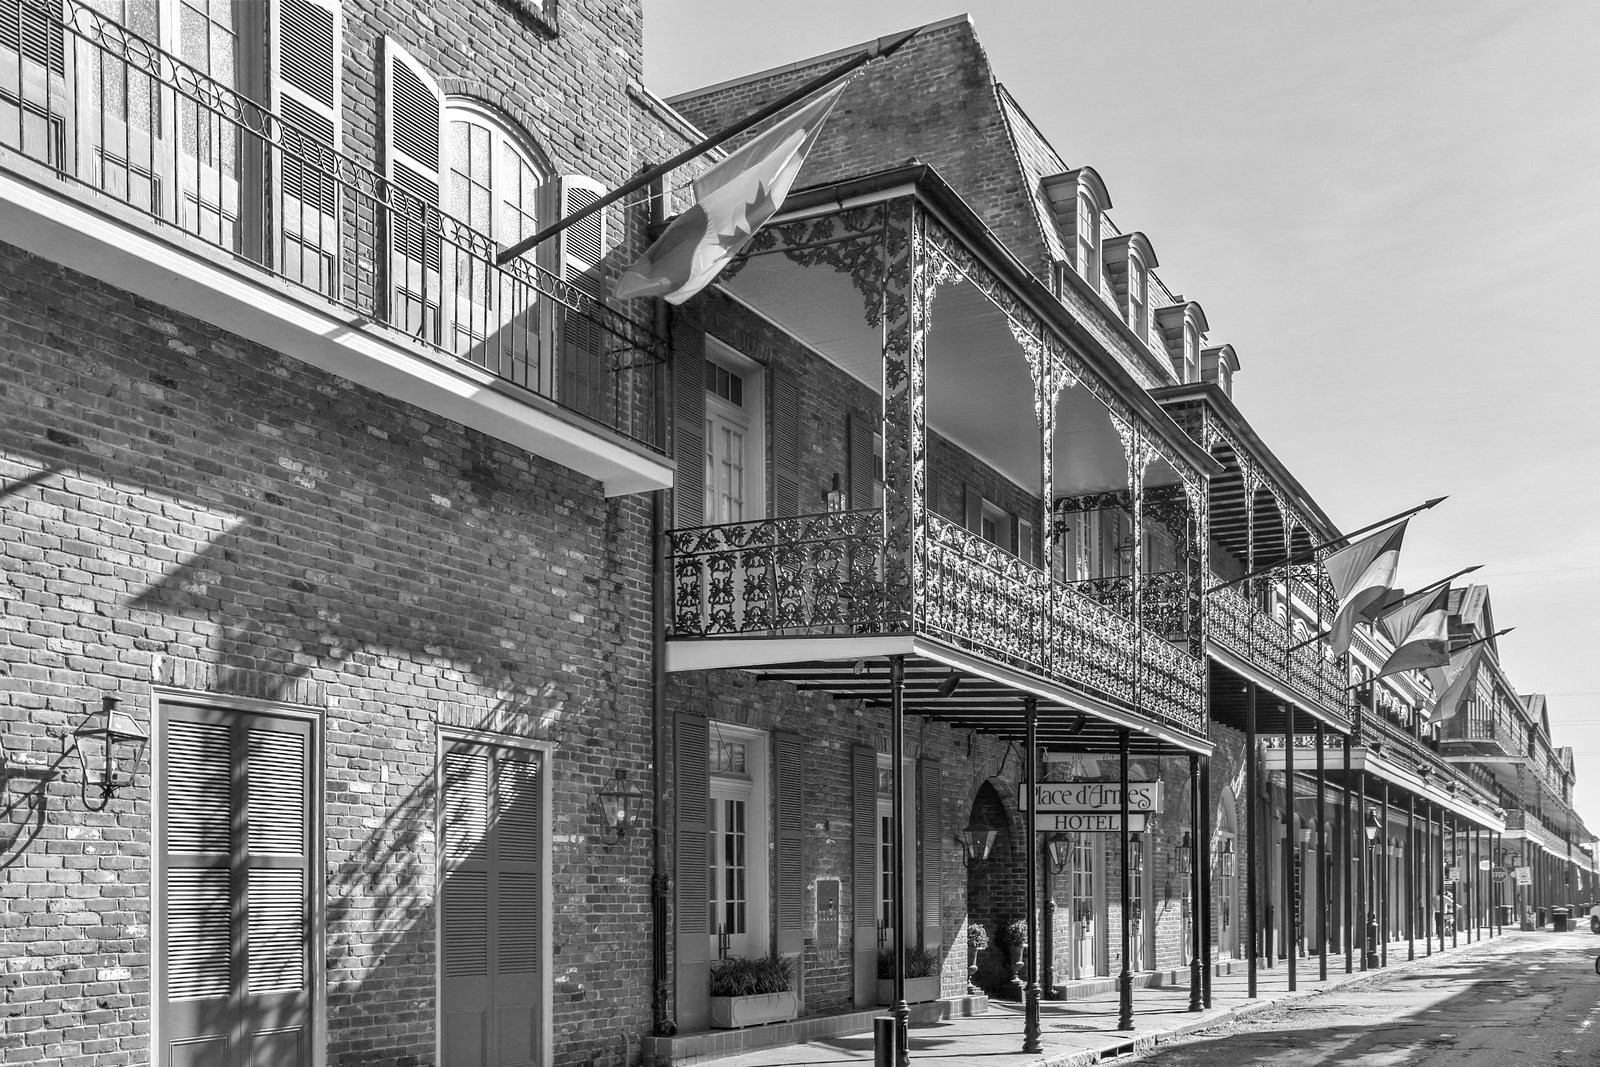 French Quarter in New Orleans - The Historic Heart of New Orleans – Go  Guides